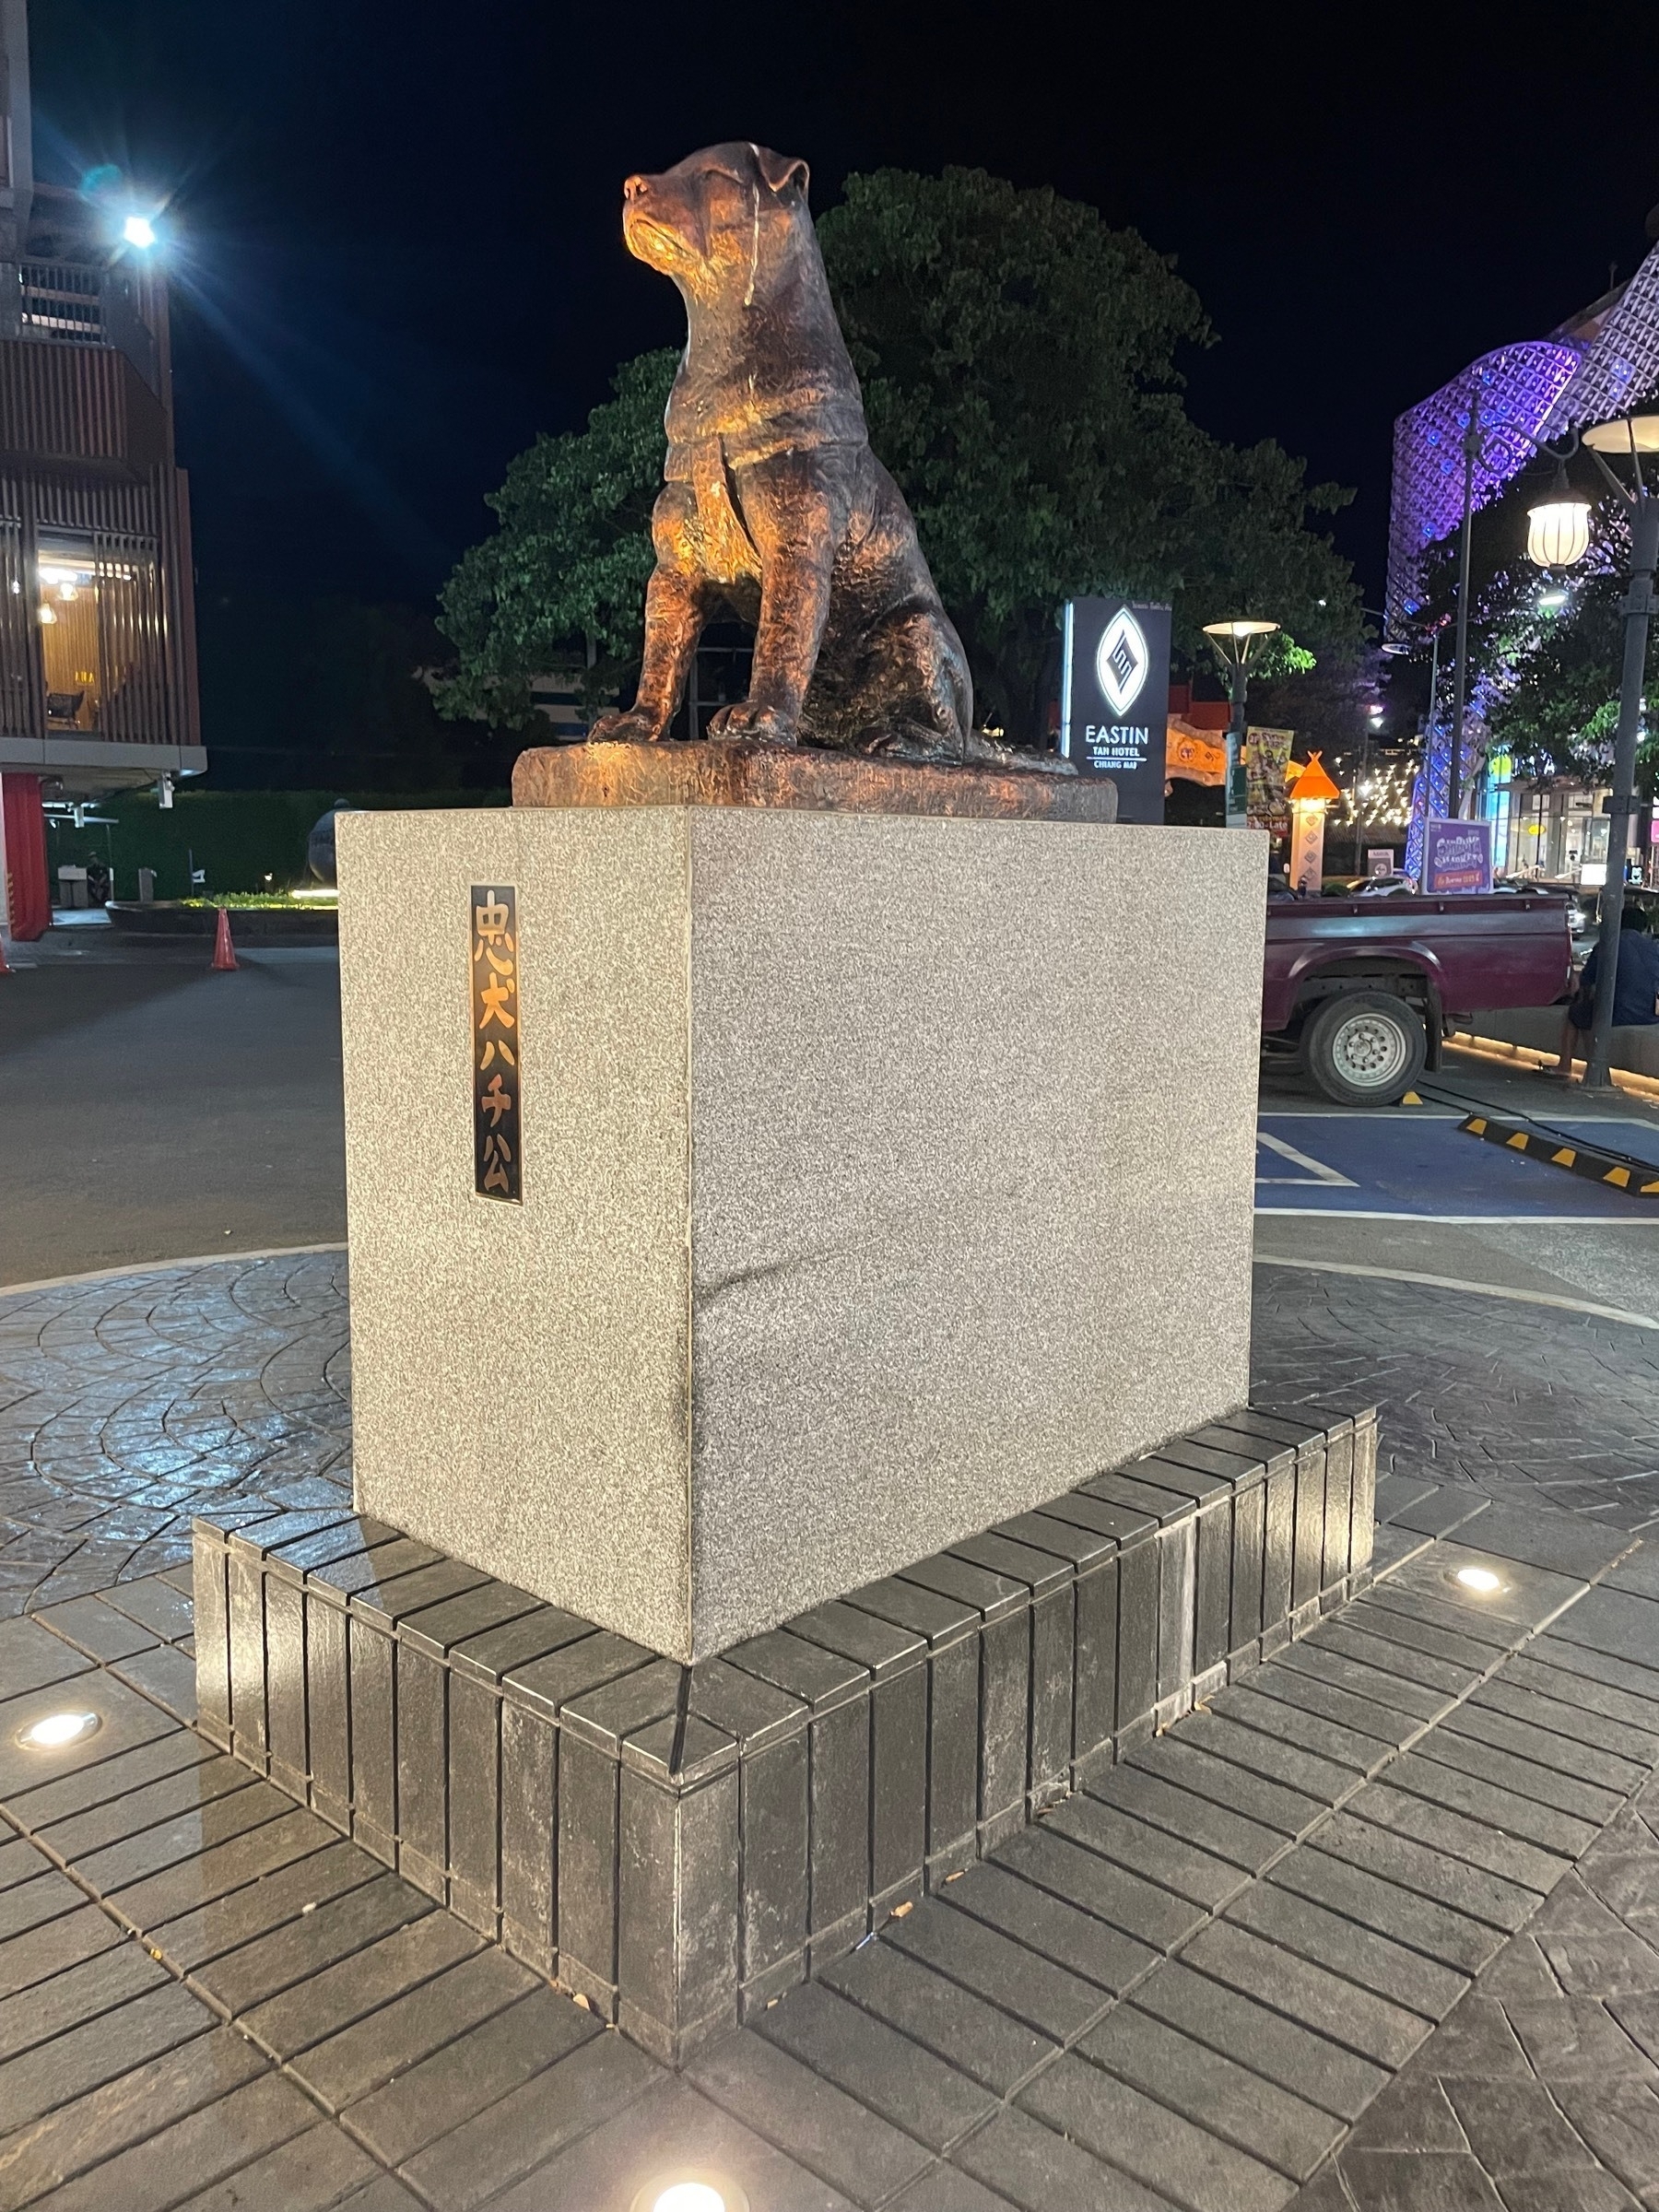 A statue of Hachiko, similar to the one in Tokyo, but this one in particular was taken at Chiang Mai, Thailand. Some bird poop is seen on the top of the Hachiko statue.